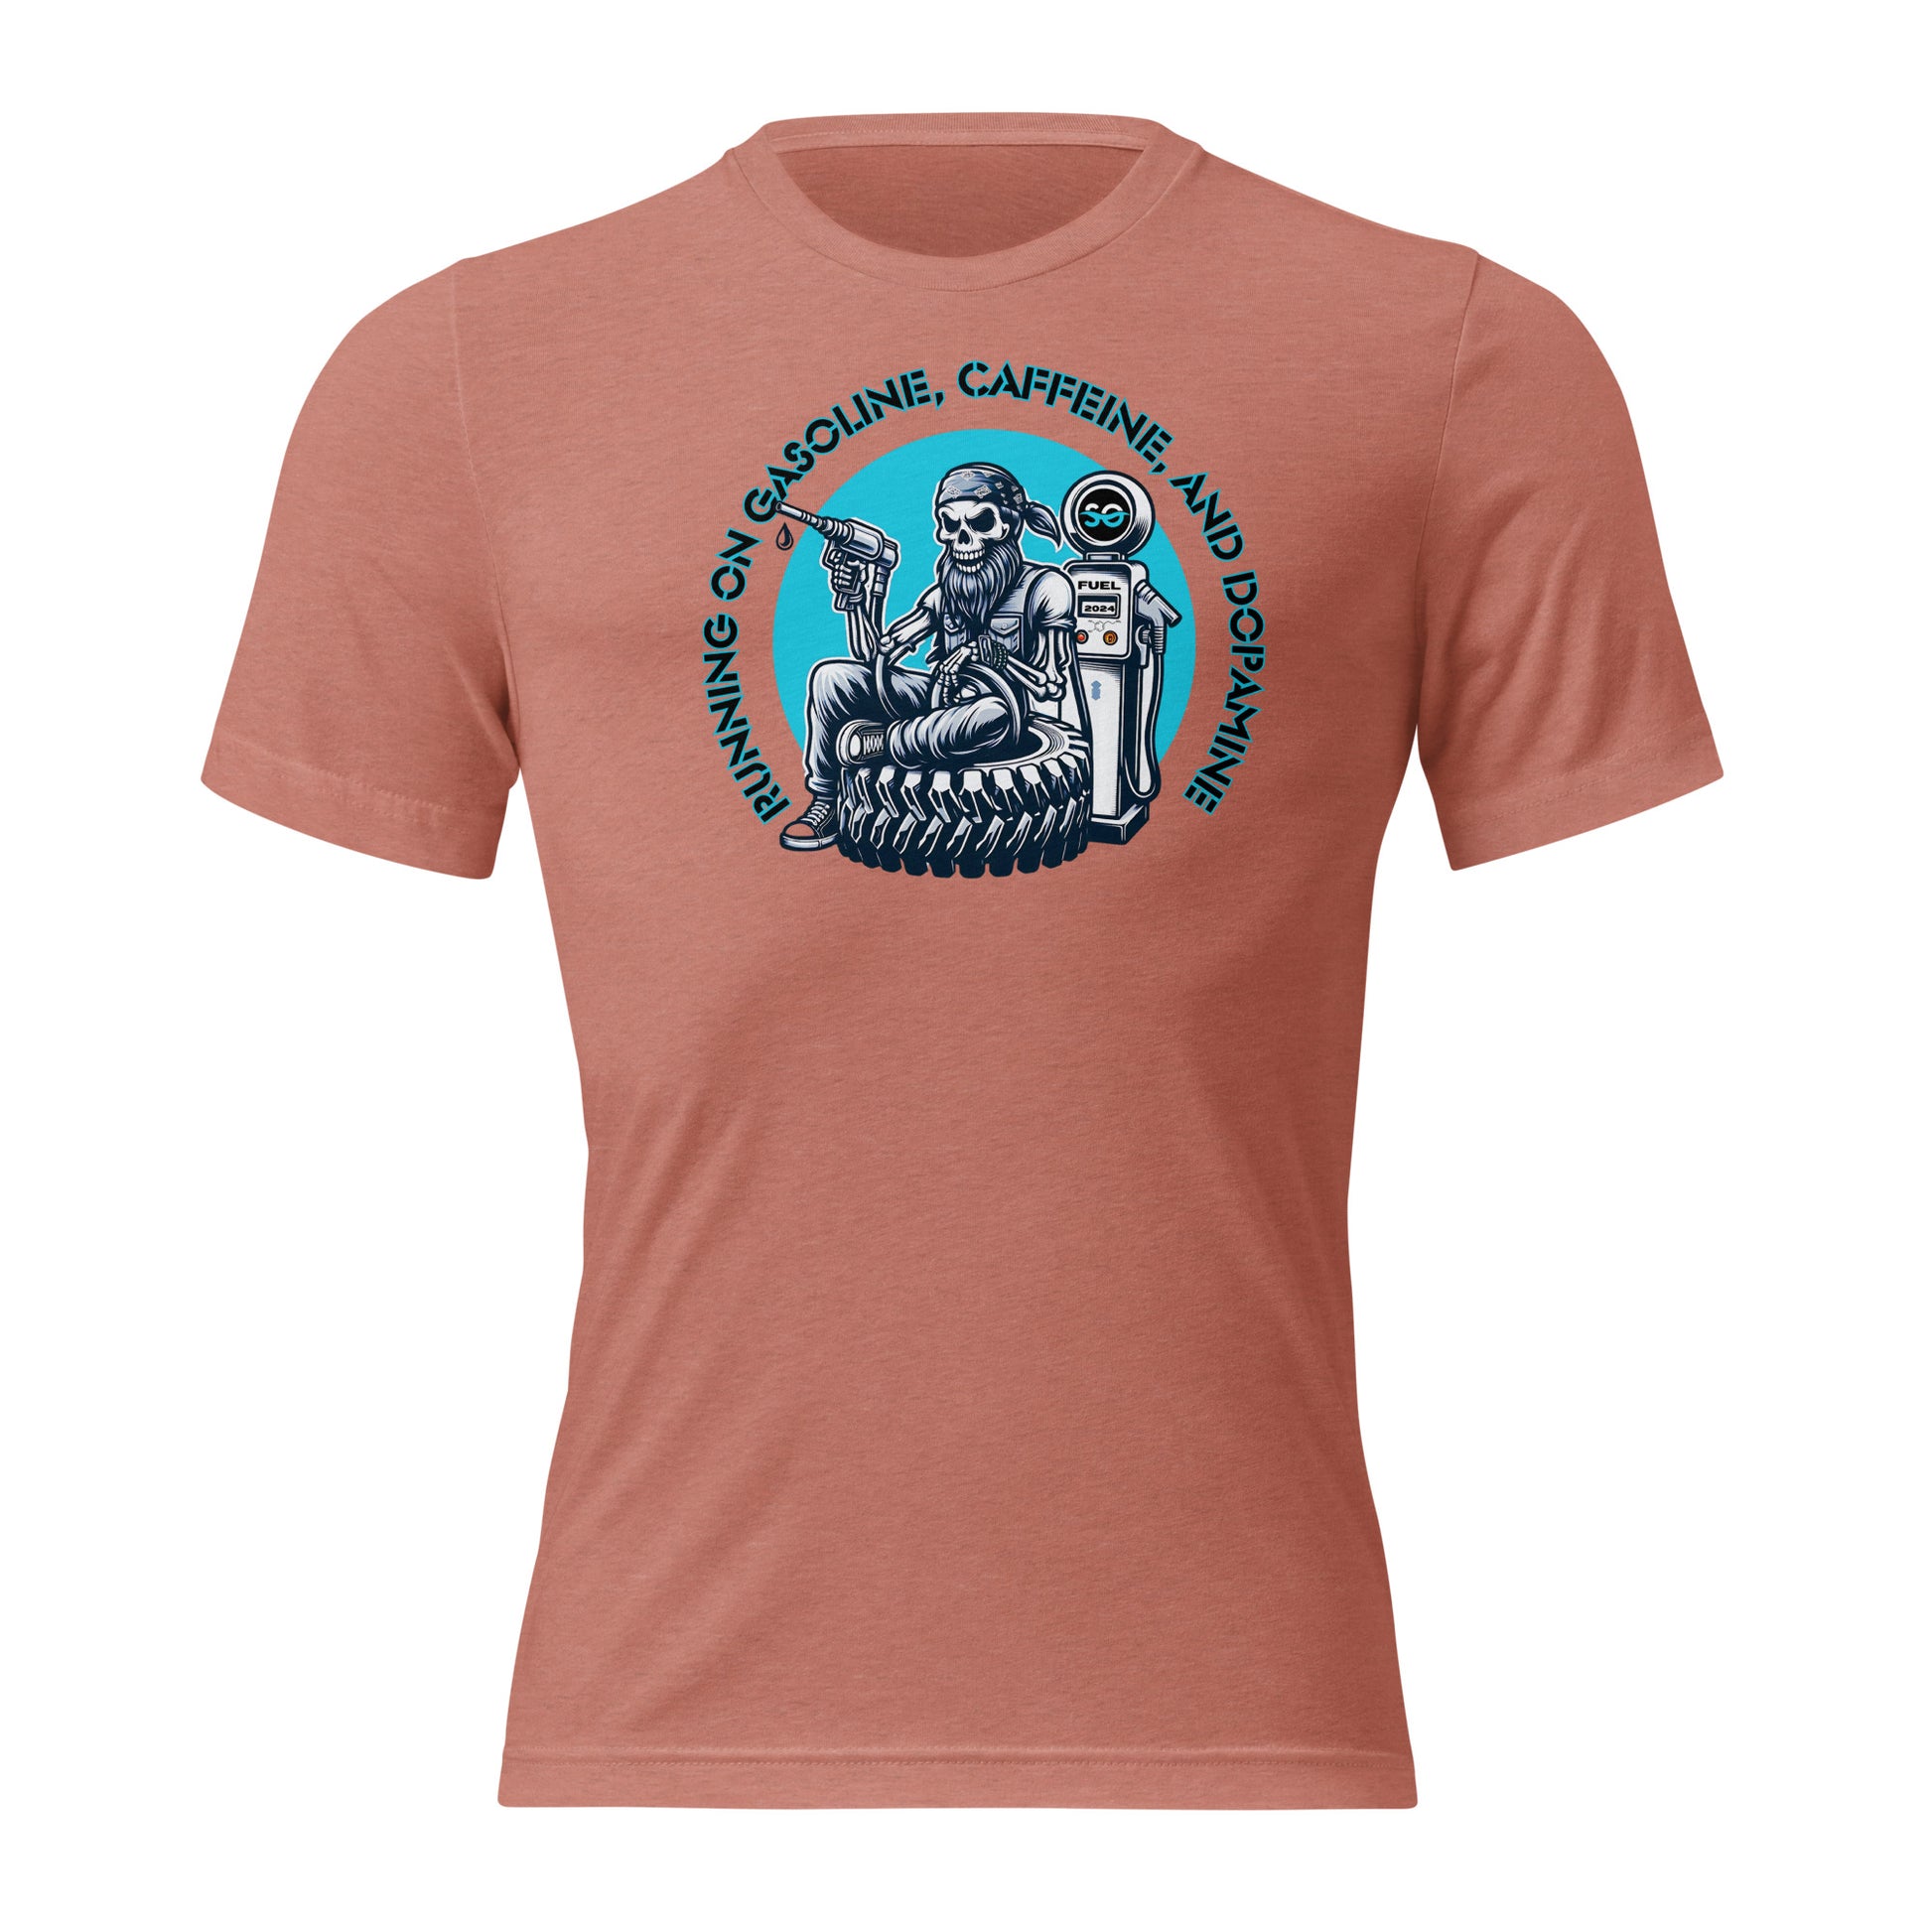 a women's t - shirt with an image of a man sitting on a